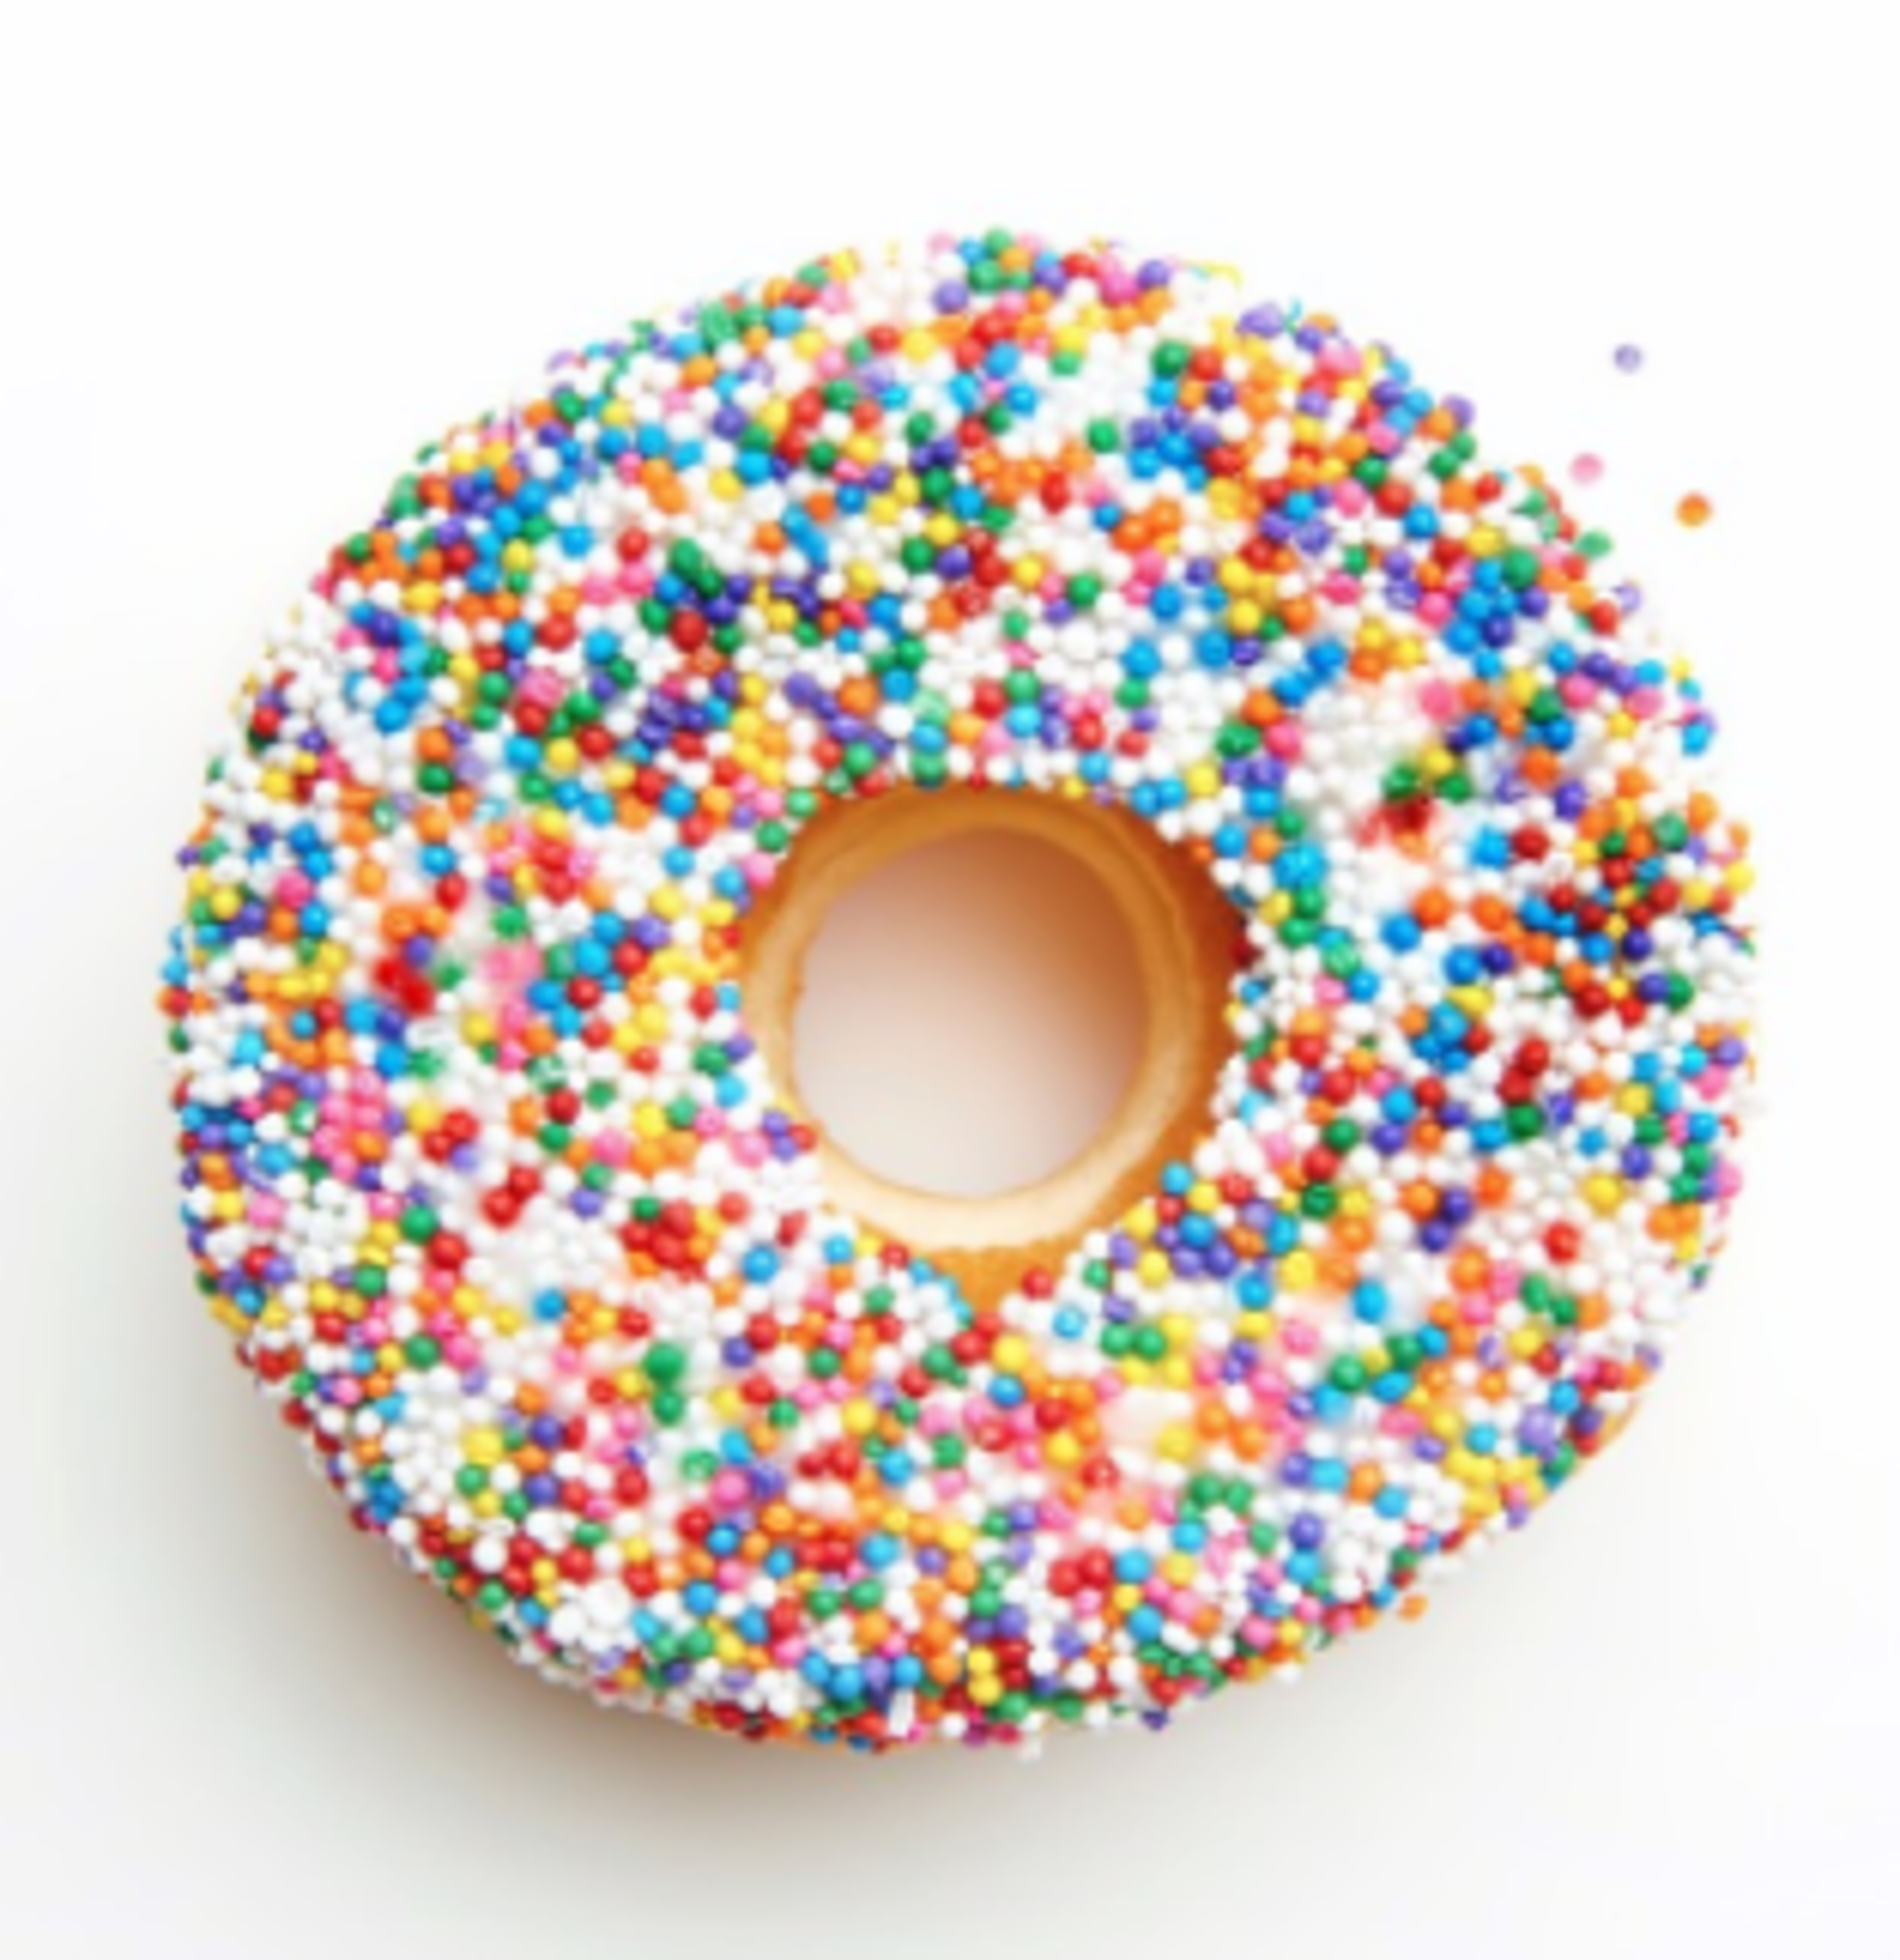 Sprinkles Donuts by Peter Andrew Lusztyk / Refined Sugar